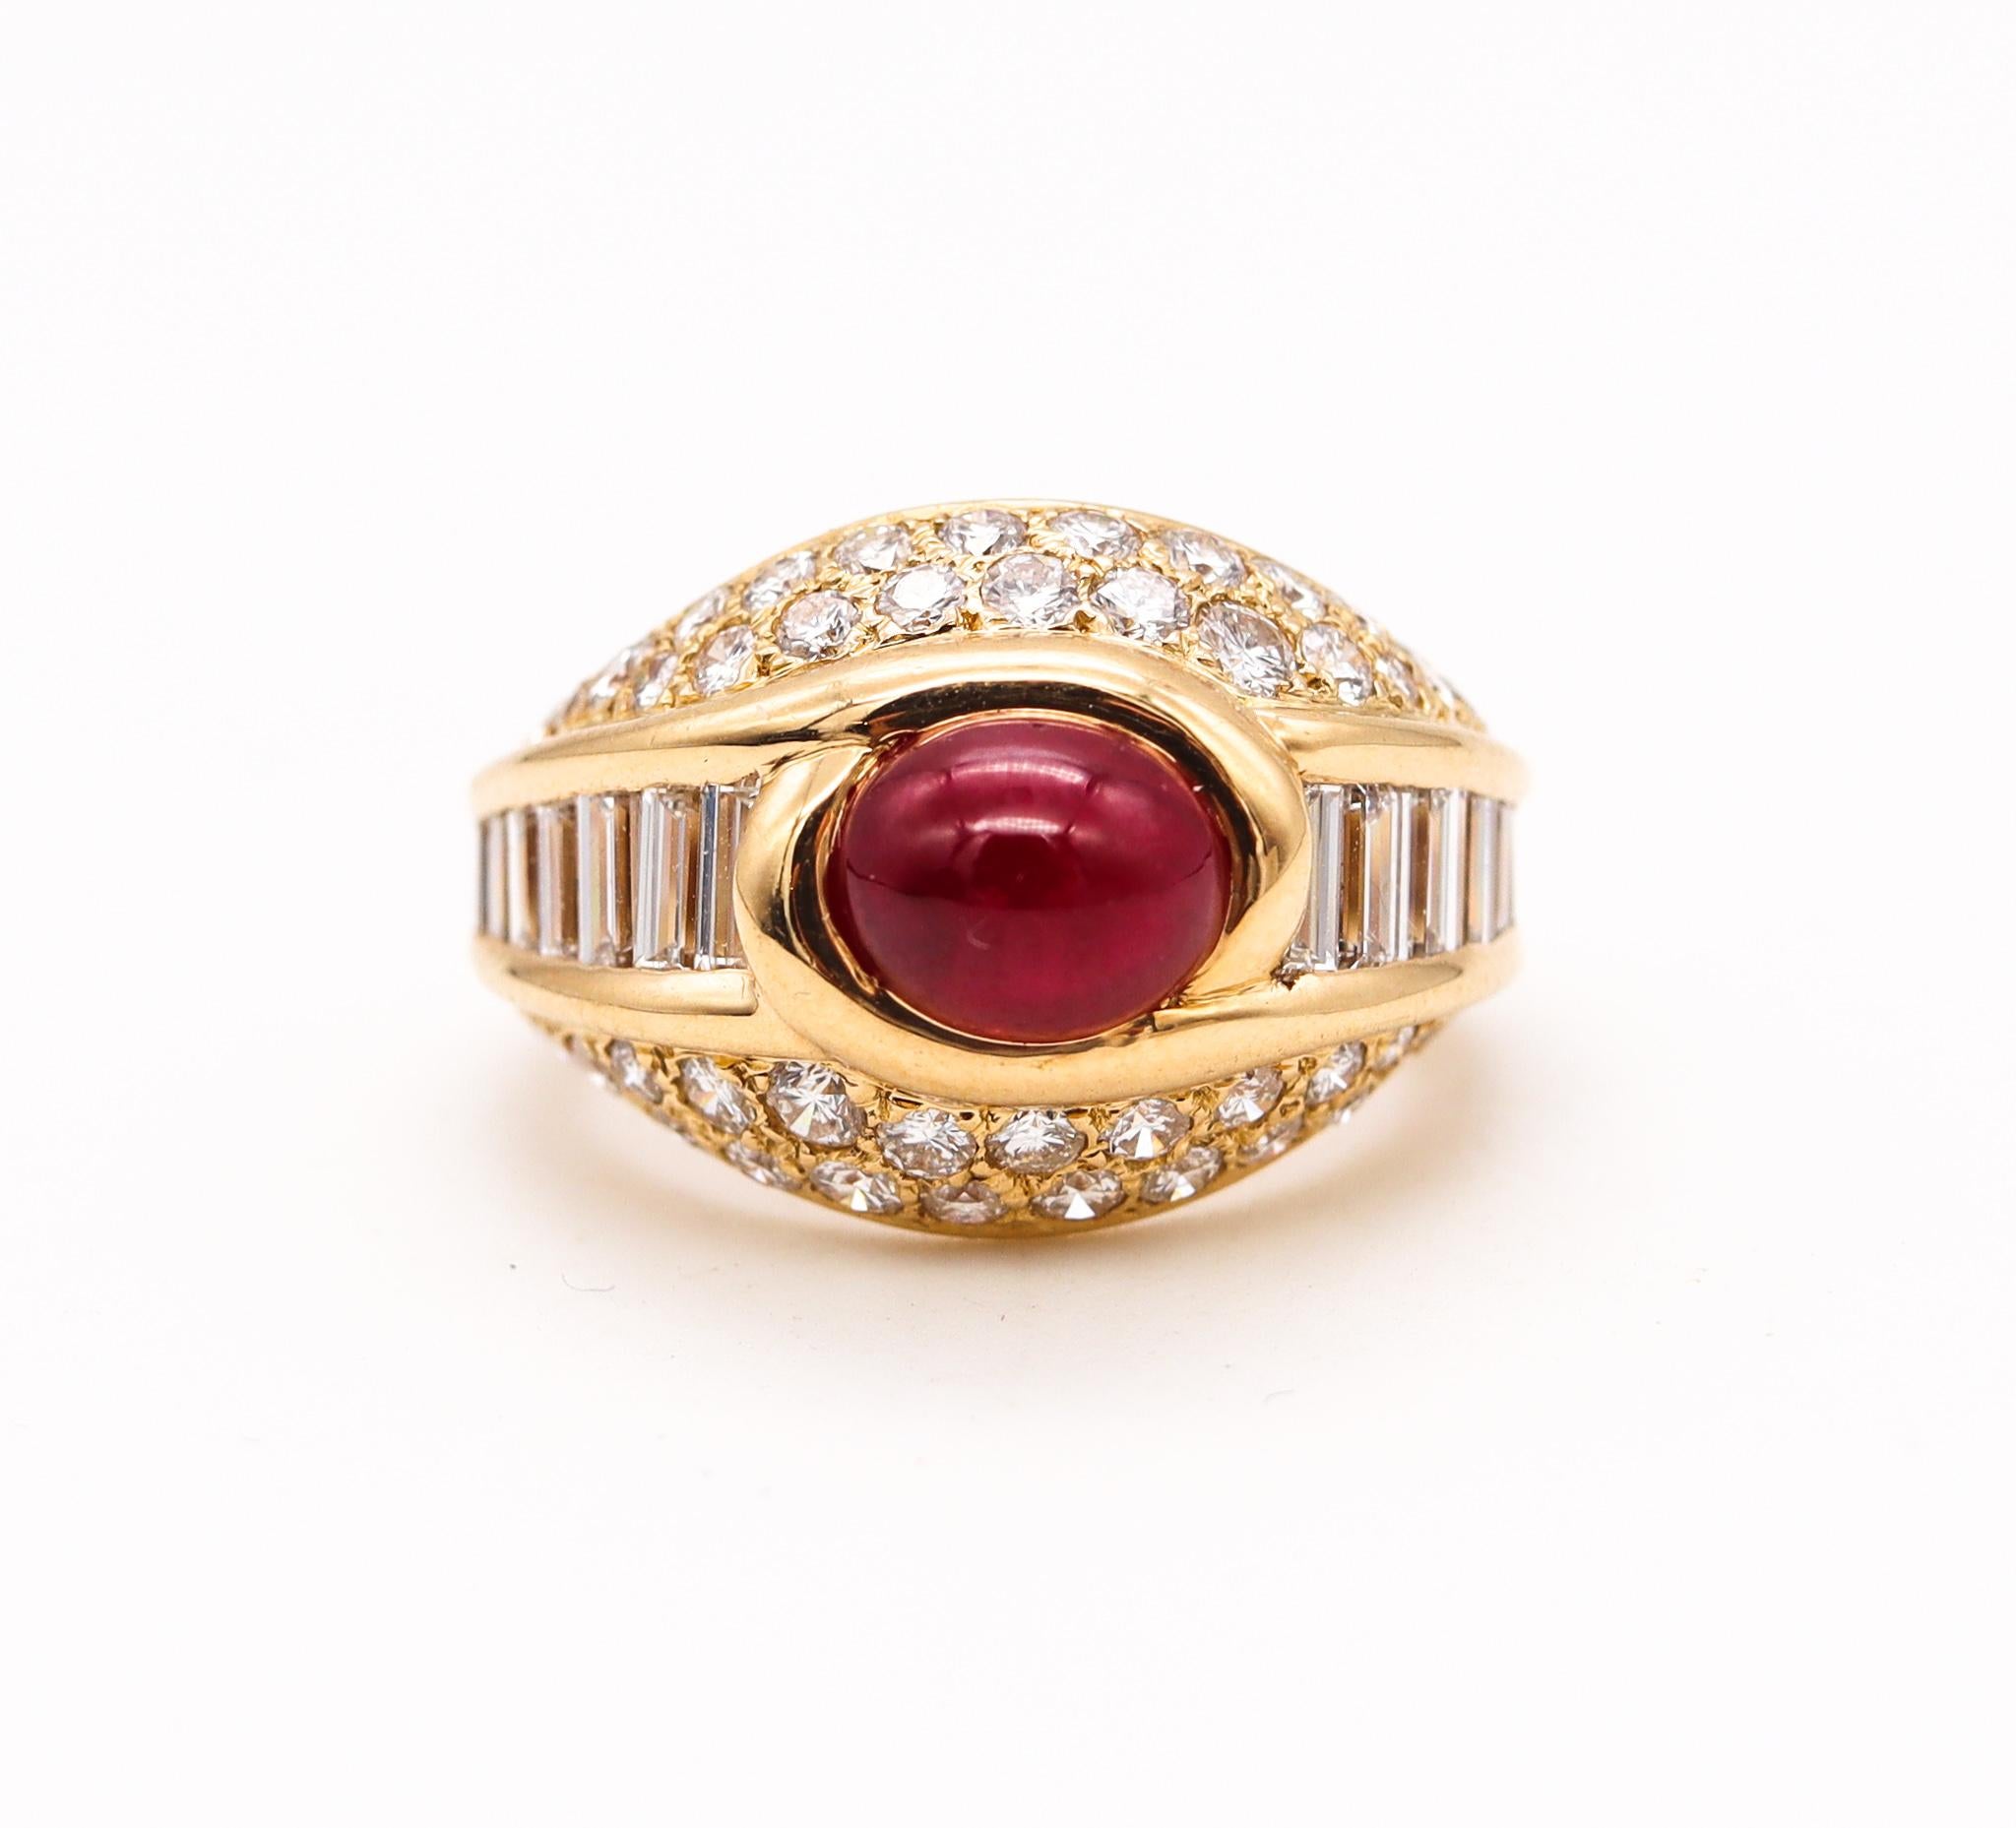 Cartier Paris Cocktail Ring in 18Kt Yellow Gold 4.49 Cts Burmese Ruby Diamonds For Sale 1